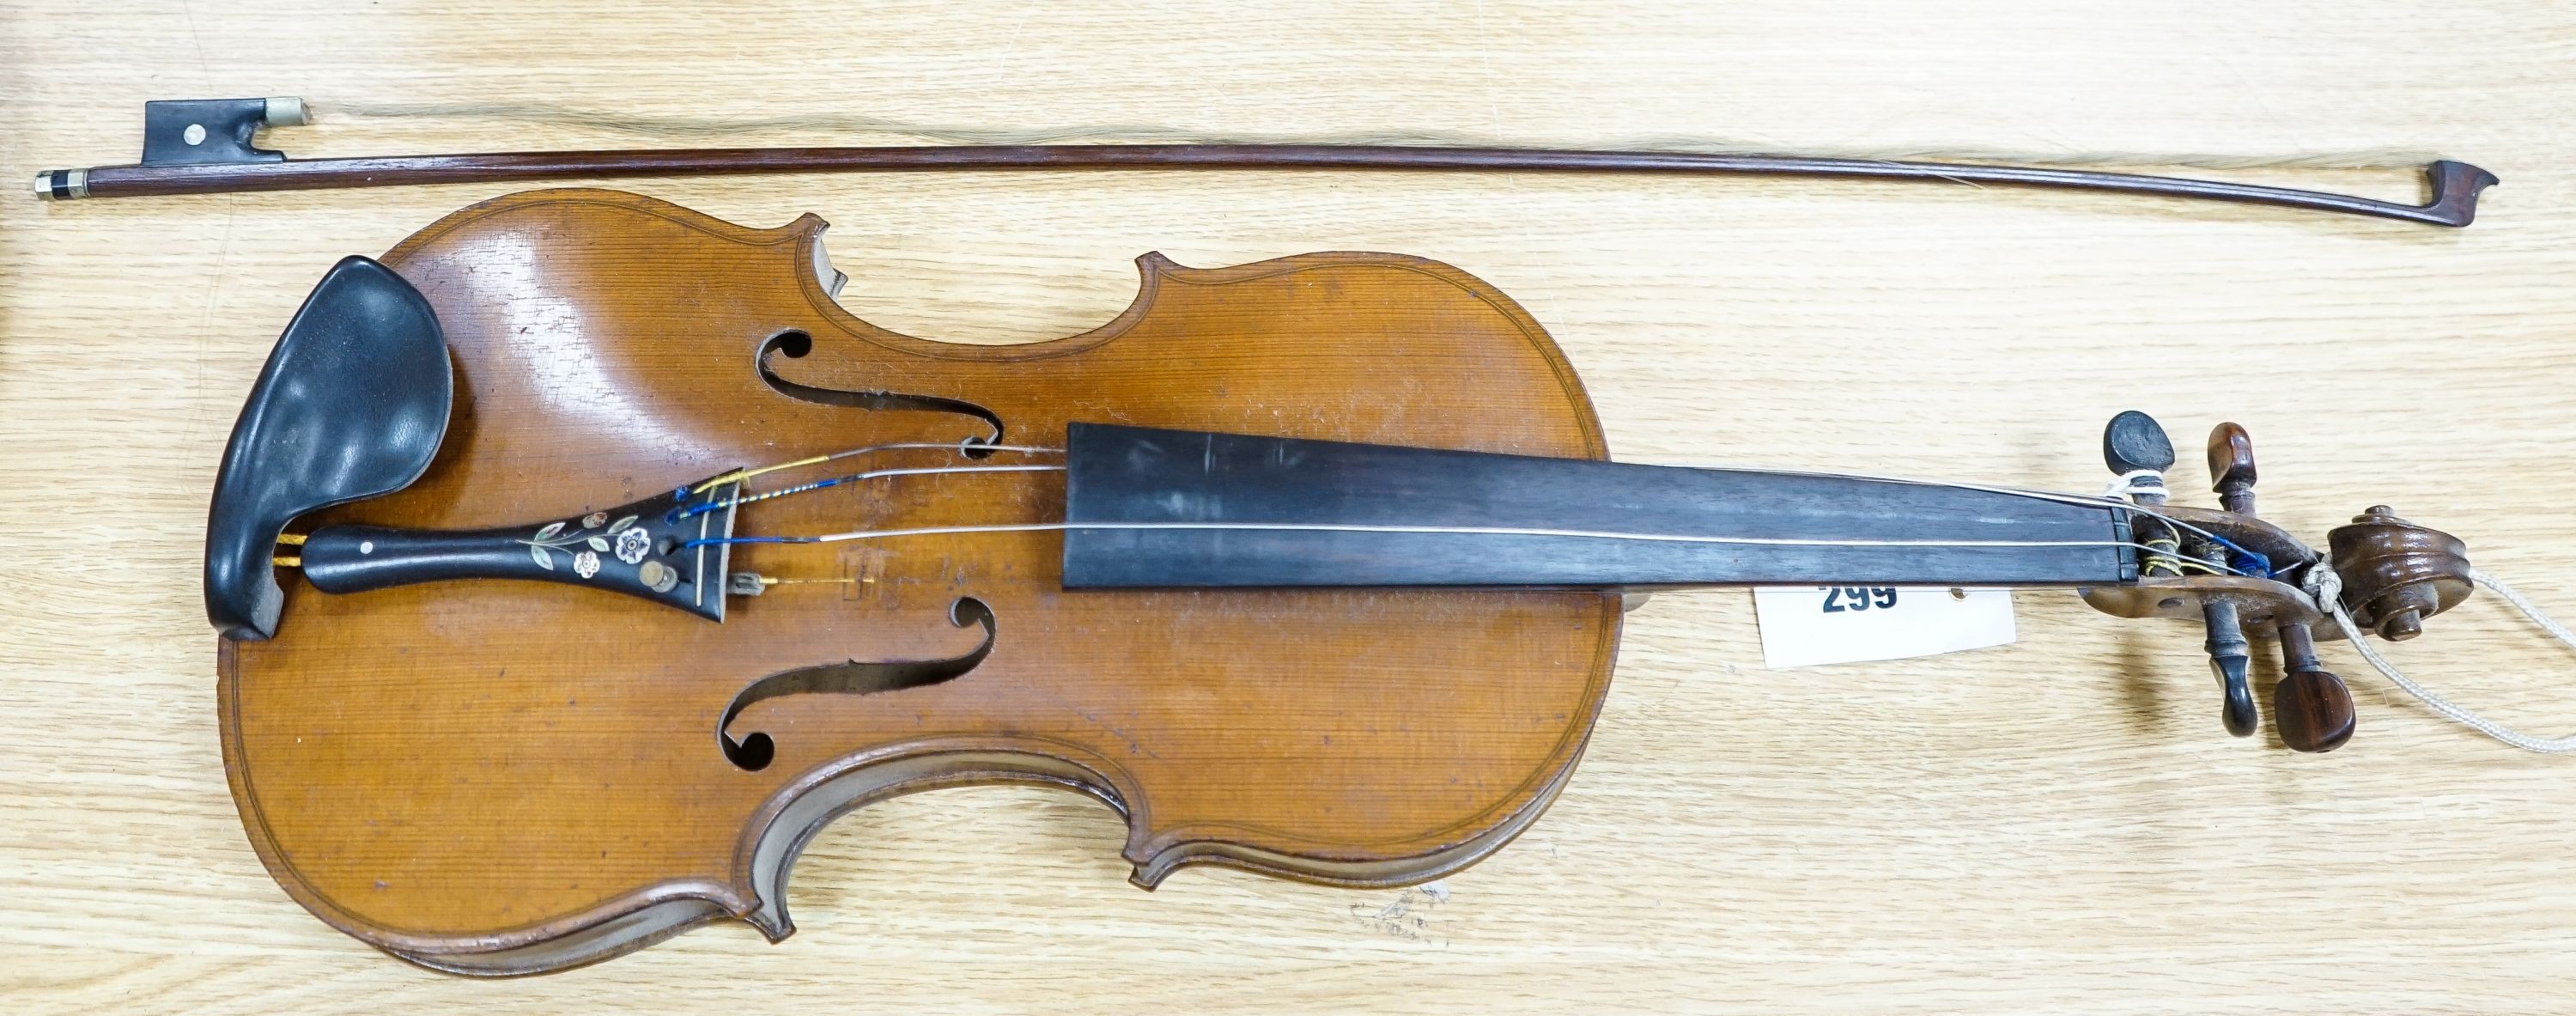 A violin labelled Francesco Ruggeri and a bow. Back of violin excluding button - 36cm